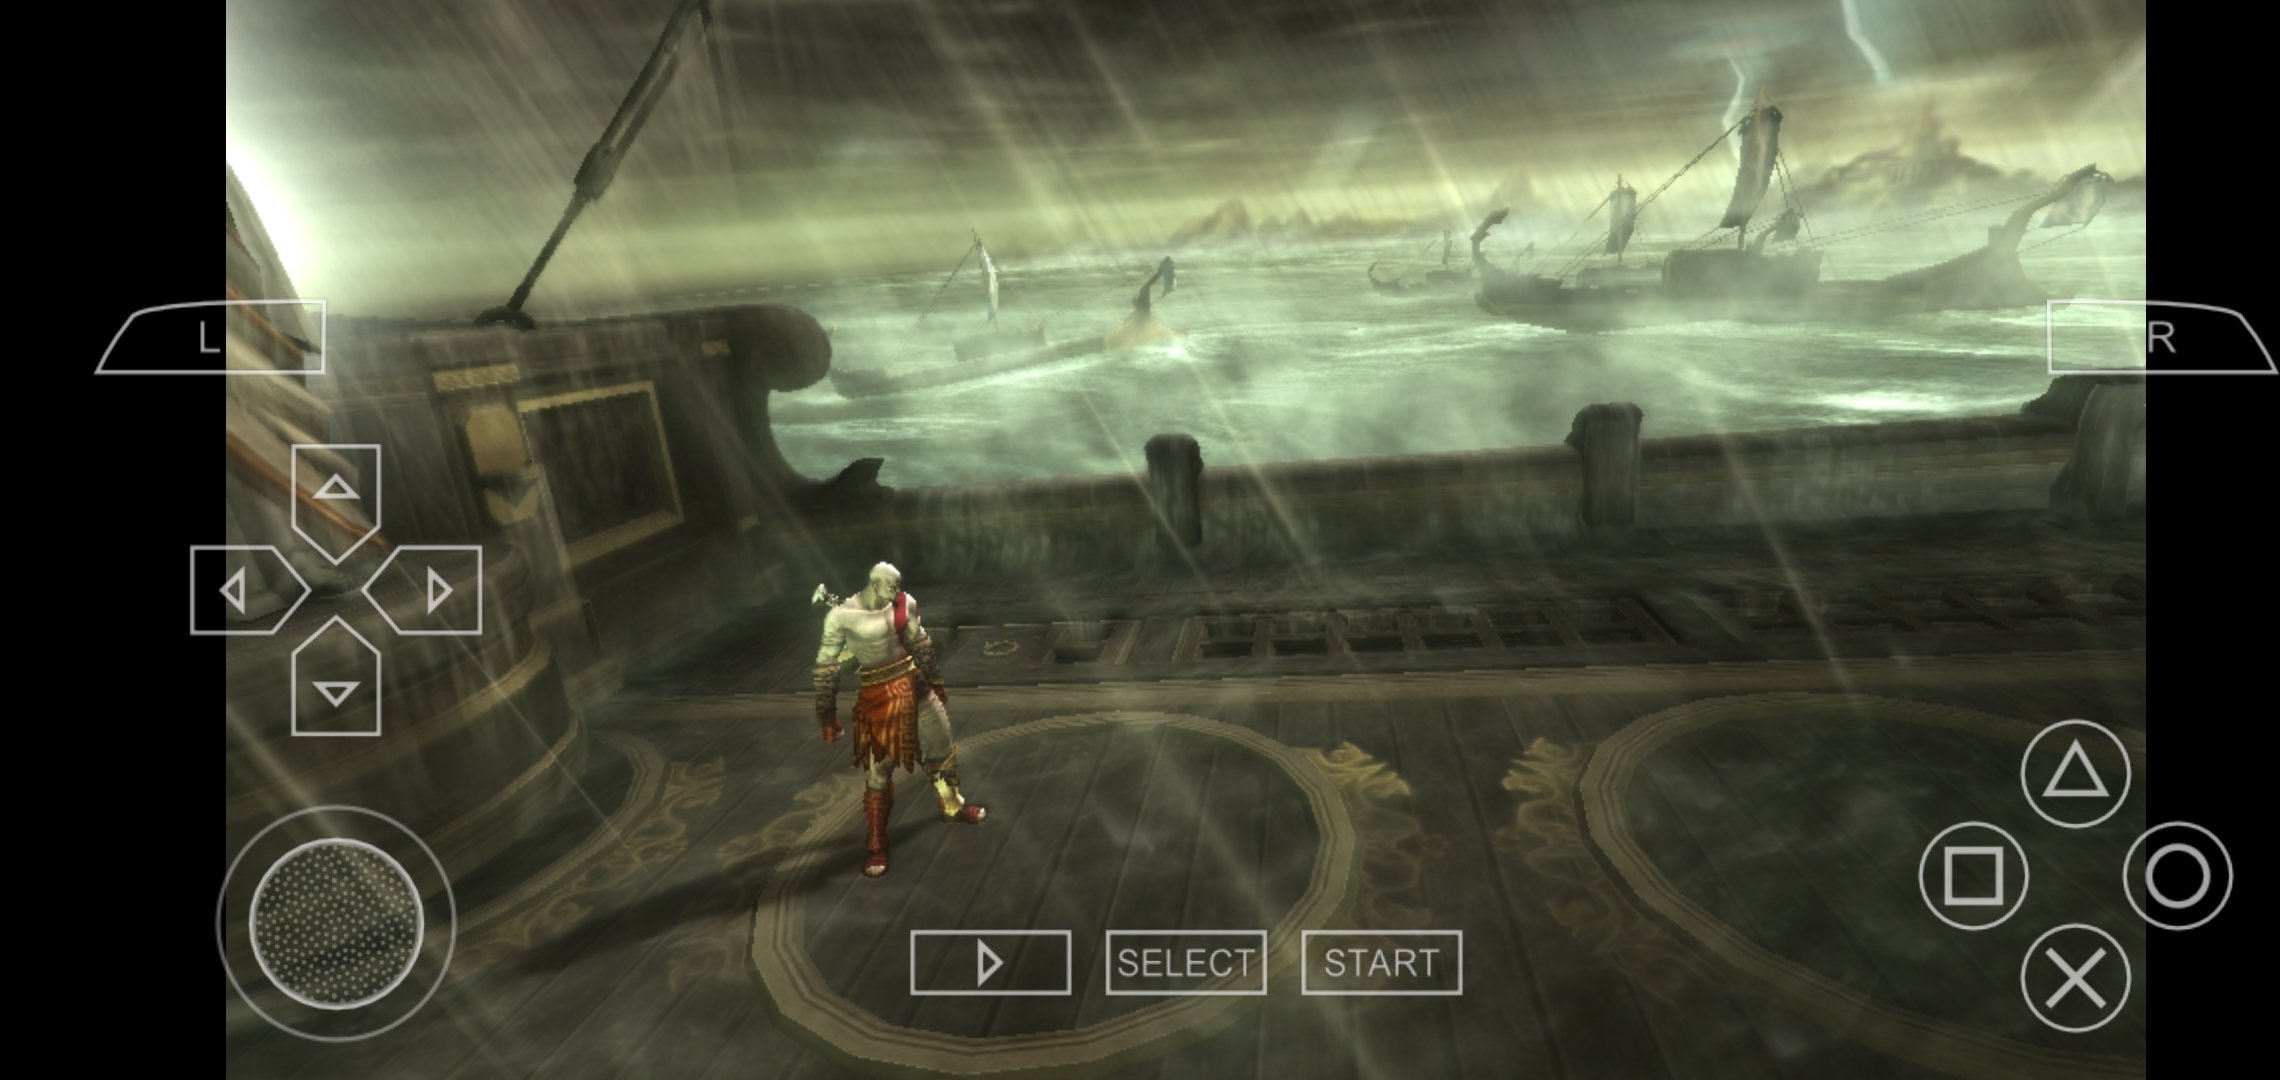 God Of War (Ghost Of Sparta) APK + Mod for Android.